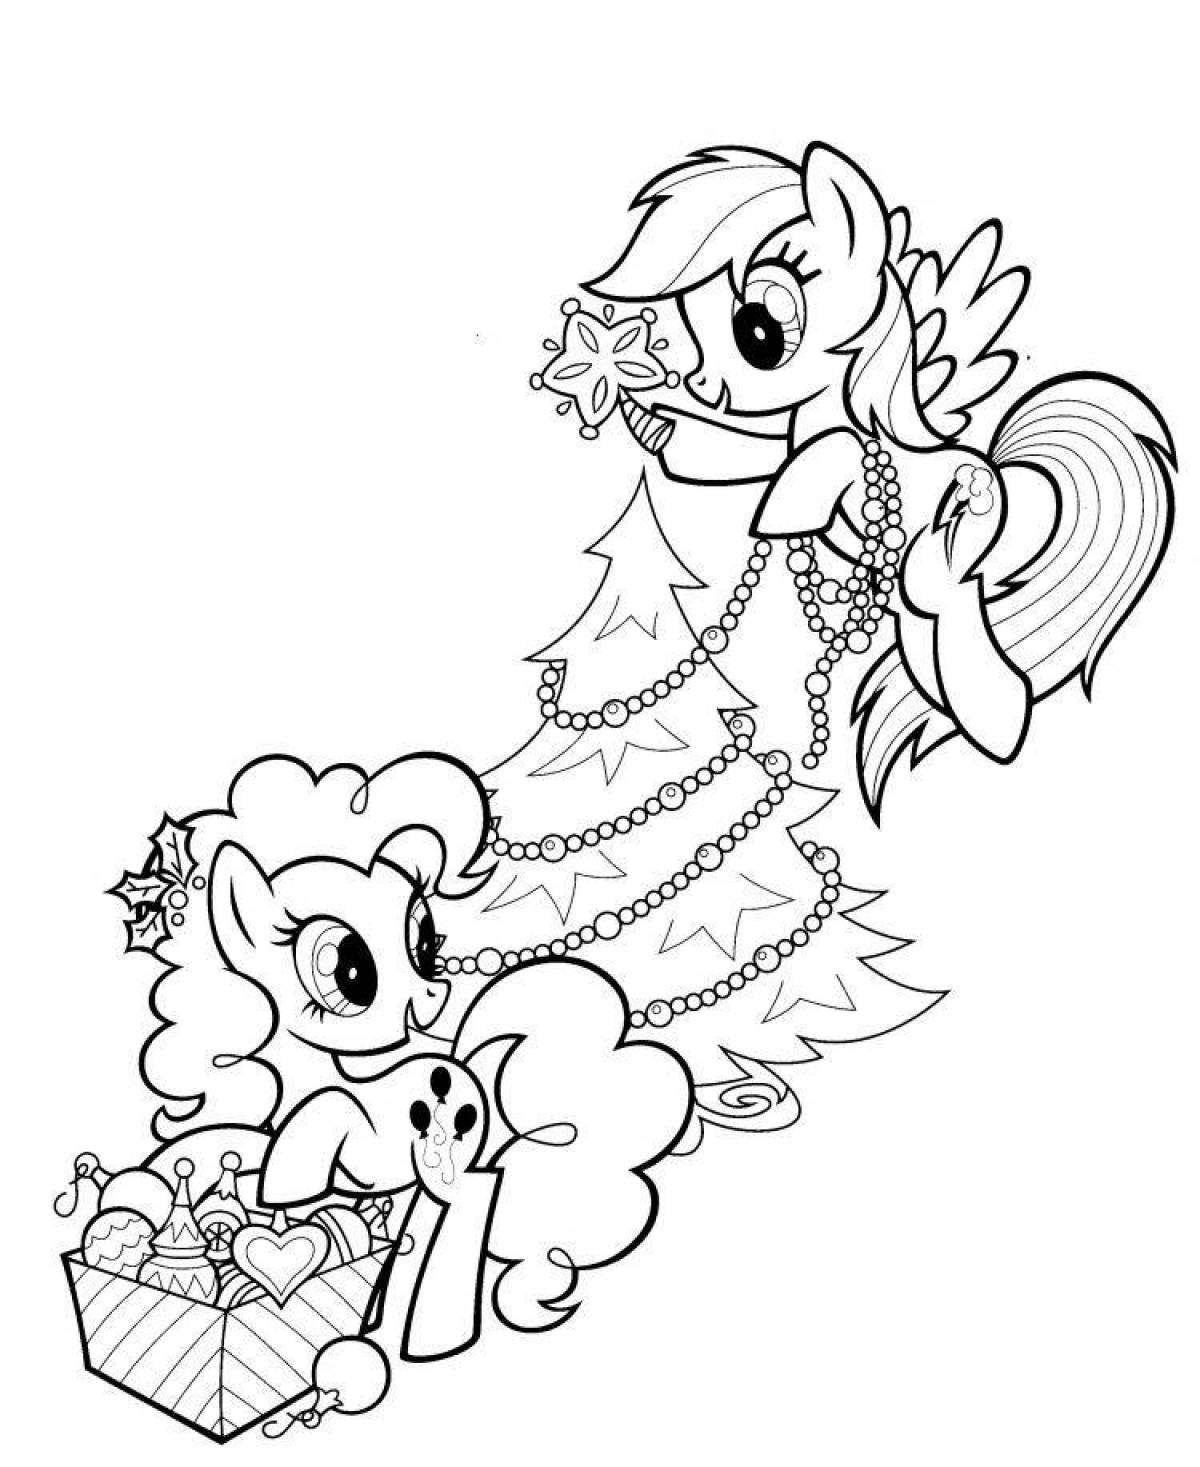 Colorful pony playtime coloring page